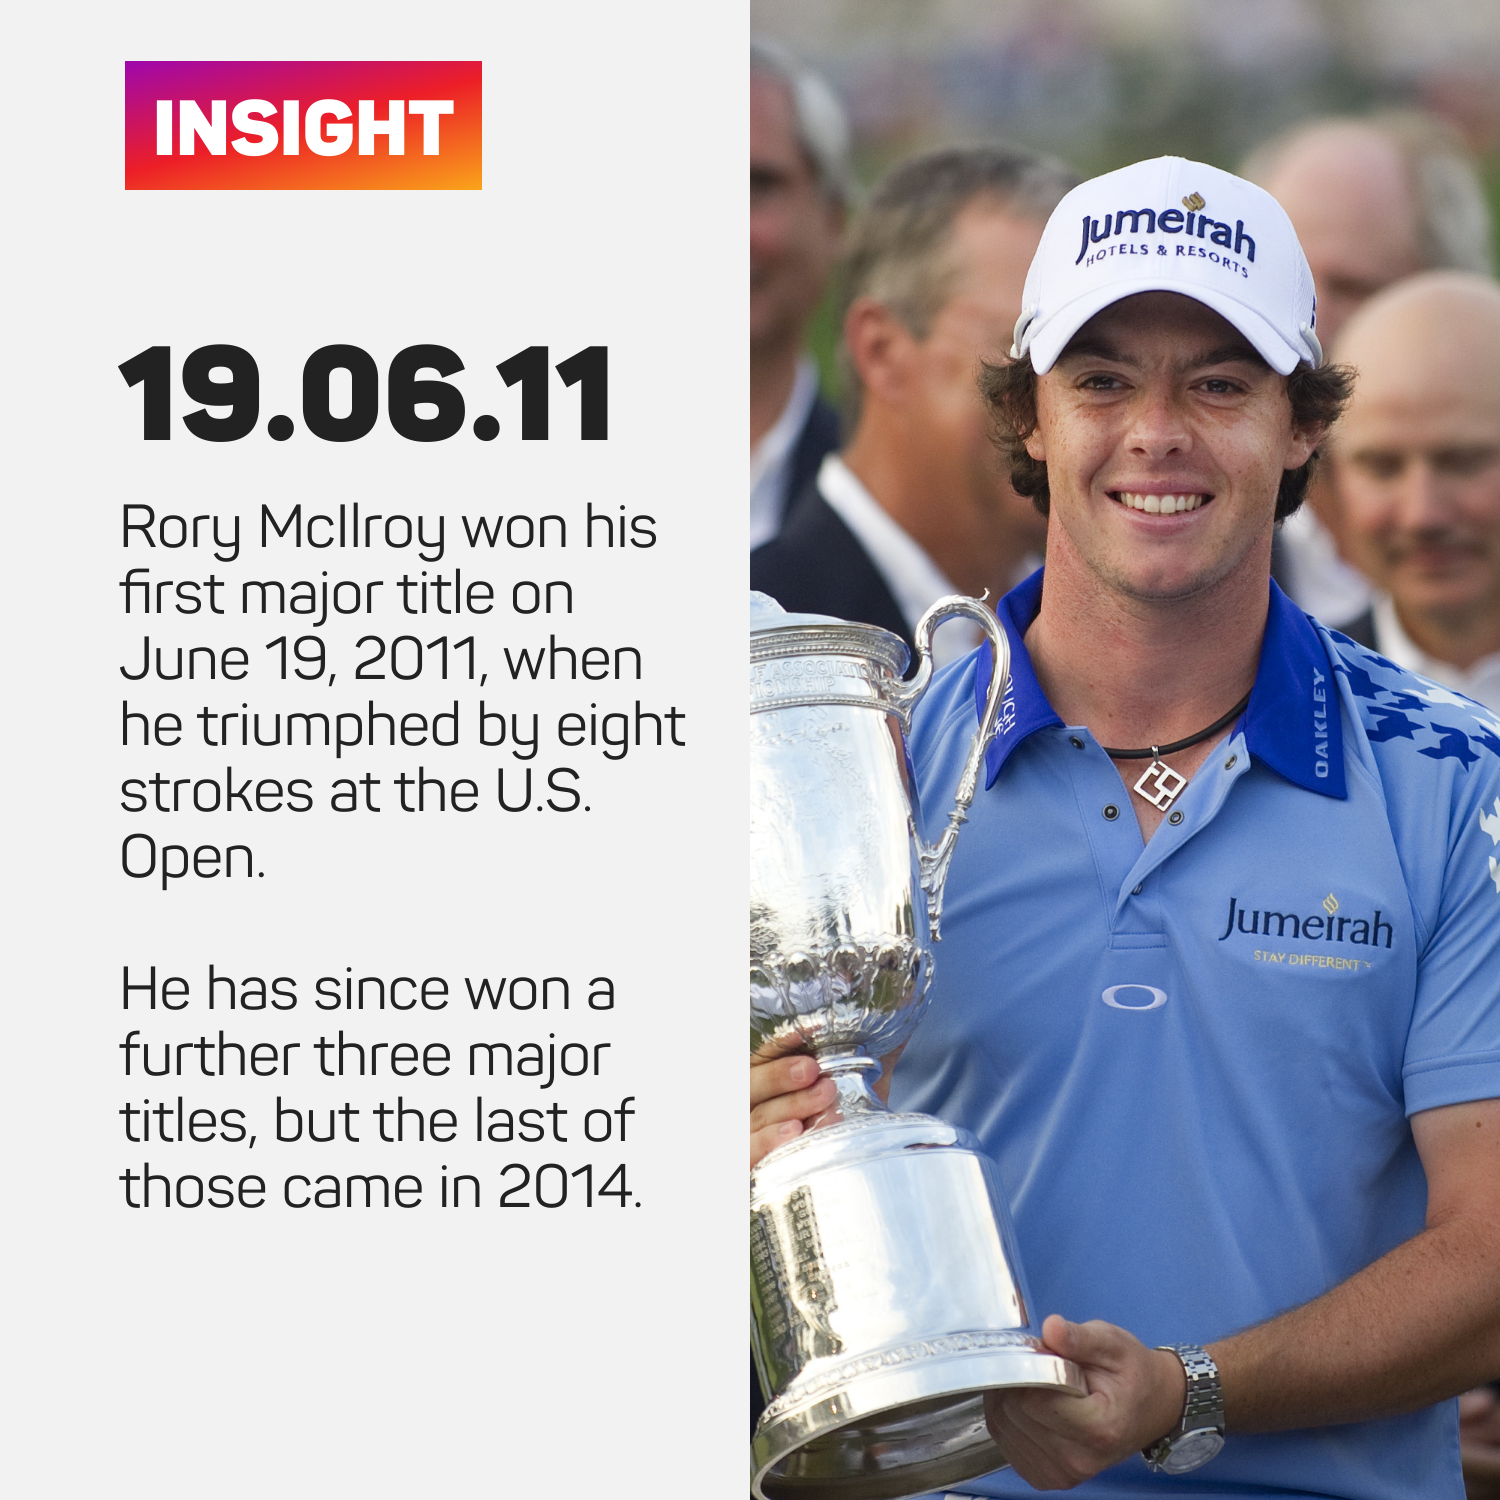 Rory McIlroy won his first major in June 2011, triumphing at the U.S. Open